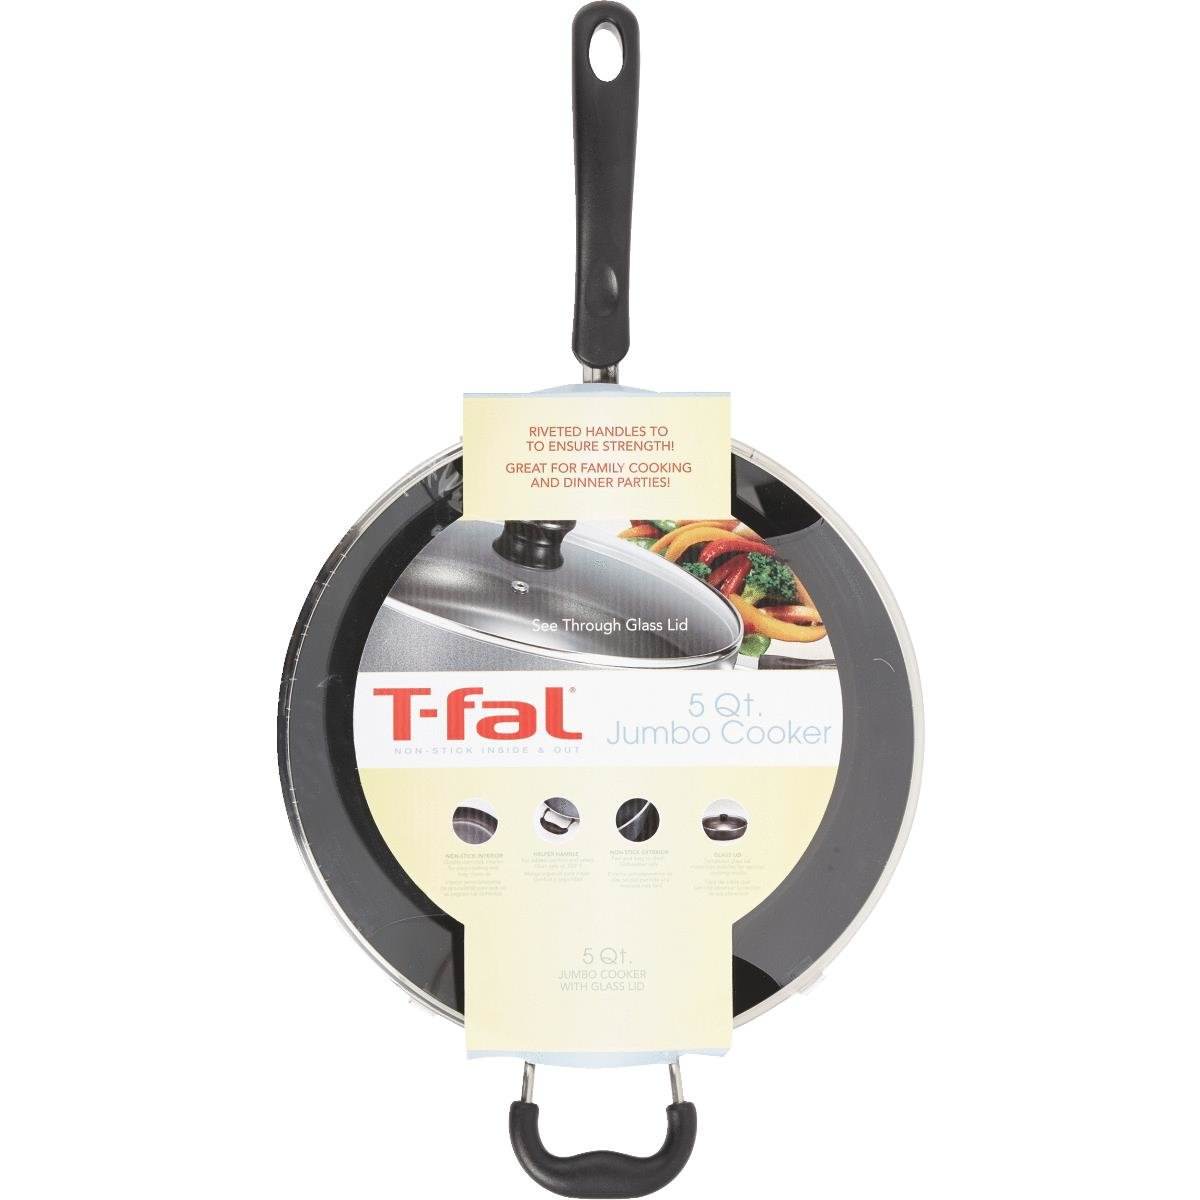 T-fal Specialty Jumbo Cooker - image 2 of 2